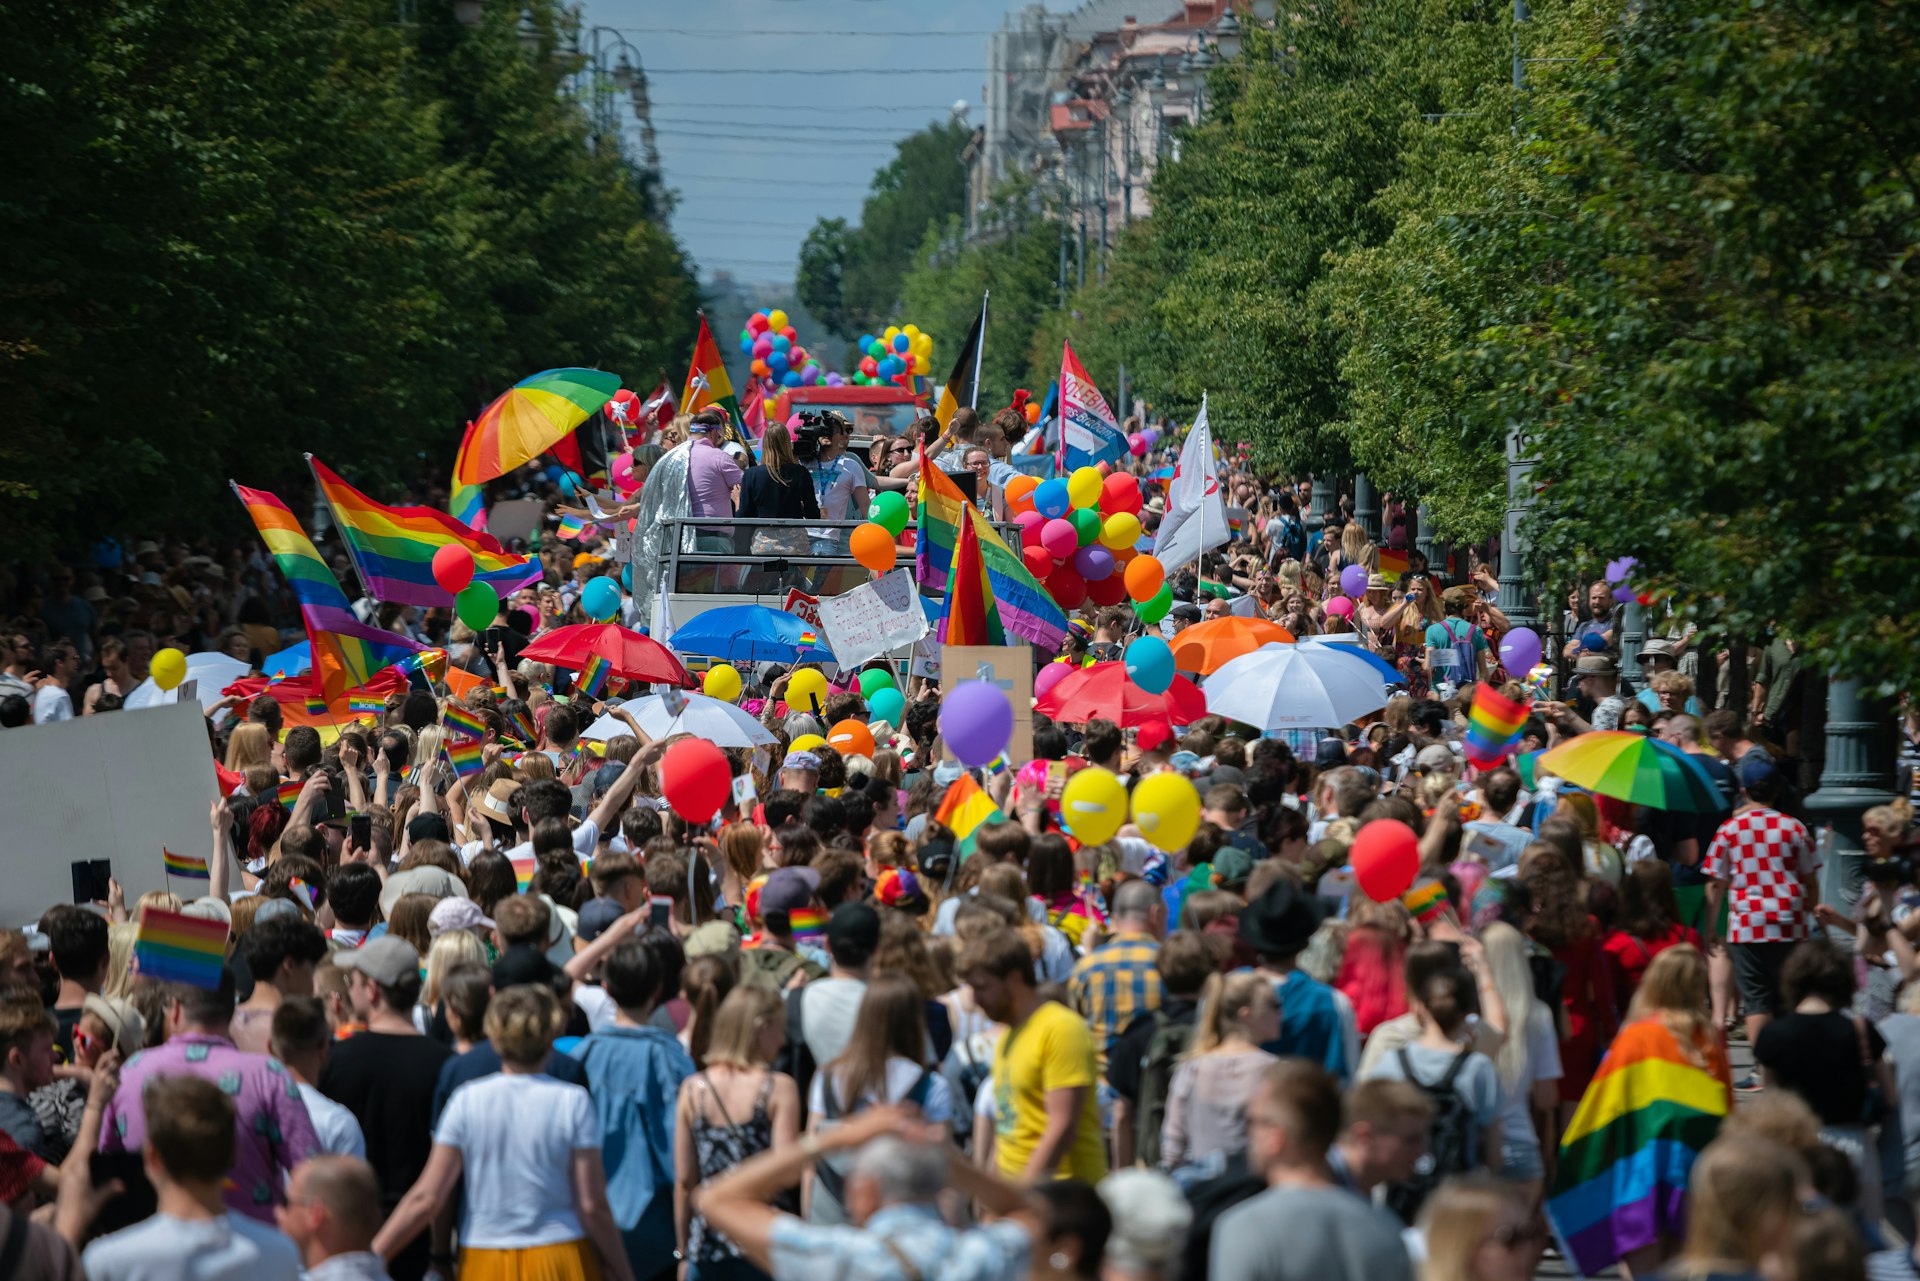 A large crowd gathers in support of the LGBTIQ+ as part of Baltic Pride in Vilnius, Lithuania